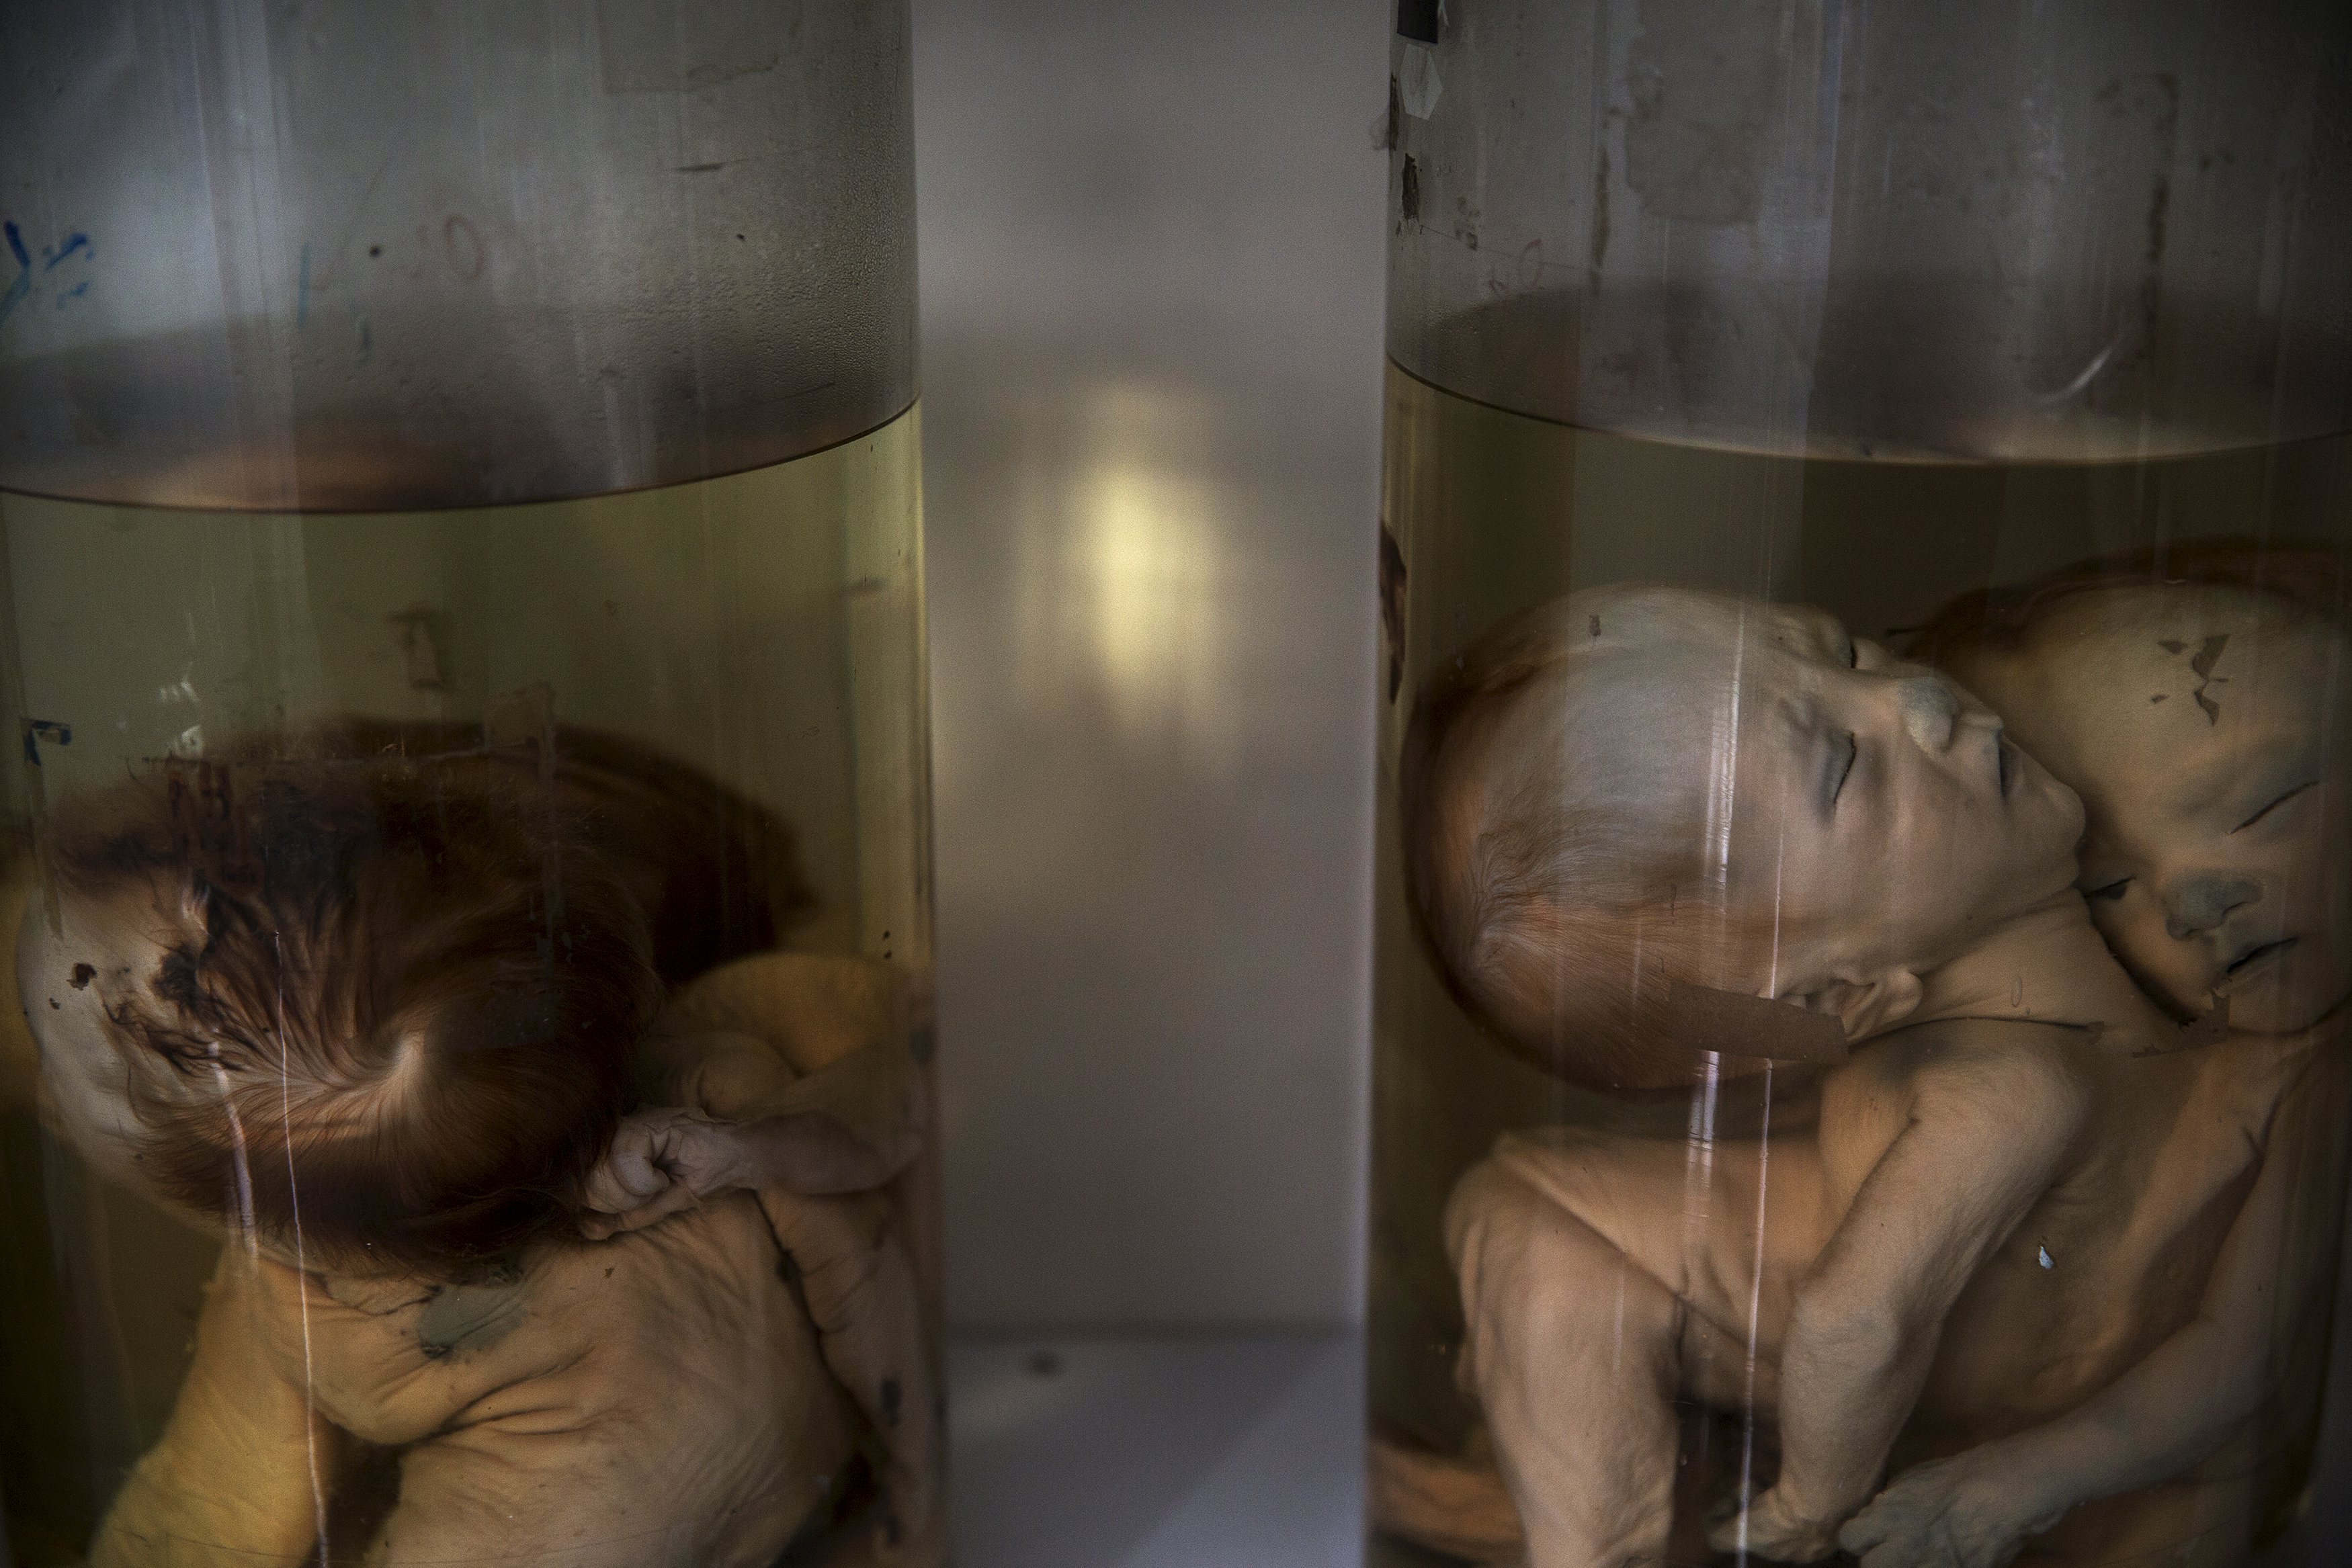 Deformed foetuses are seen inside glass containers in an exhibition room at Peace Village in Tu Du hospital in Ho Chi Minh City April 14, 2015. Doctors at the hospital attribute the high incidence of deformities to the use of Agent Orange during the Vietnam War. According to the head of the Peace Village, more than two-thirds of its over 60 patients are from areas that were heavily sprayed by Agent Orange and their health conditions are linked to the use of the defoliant.